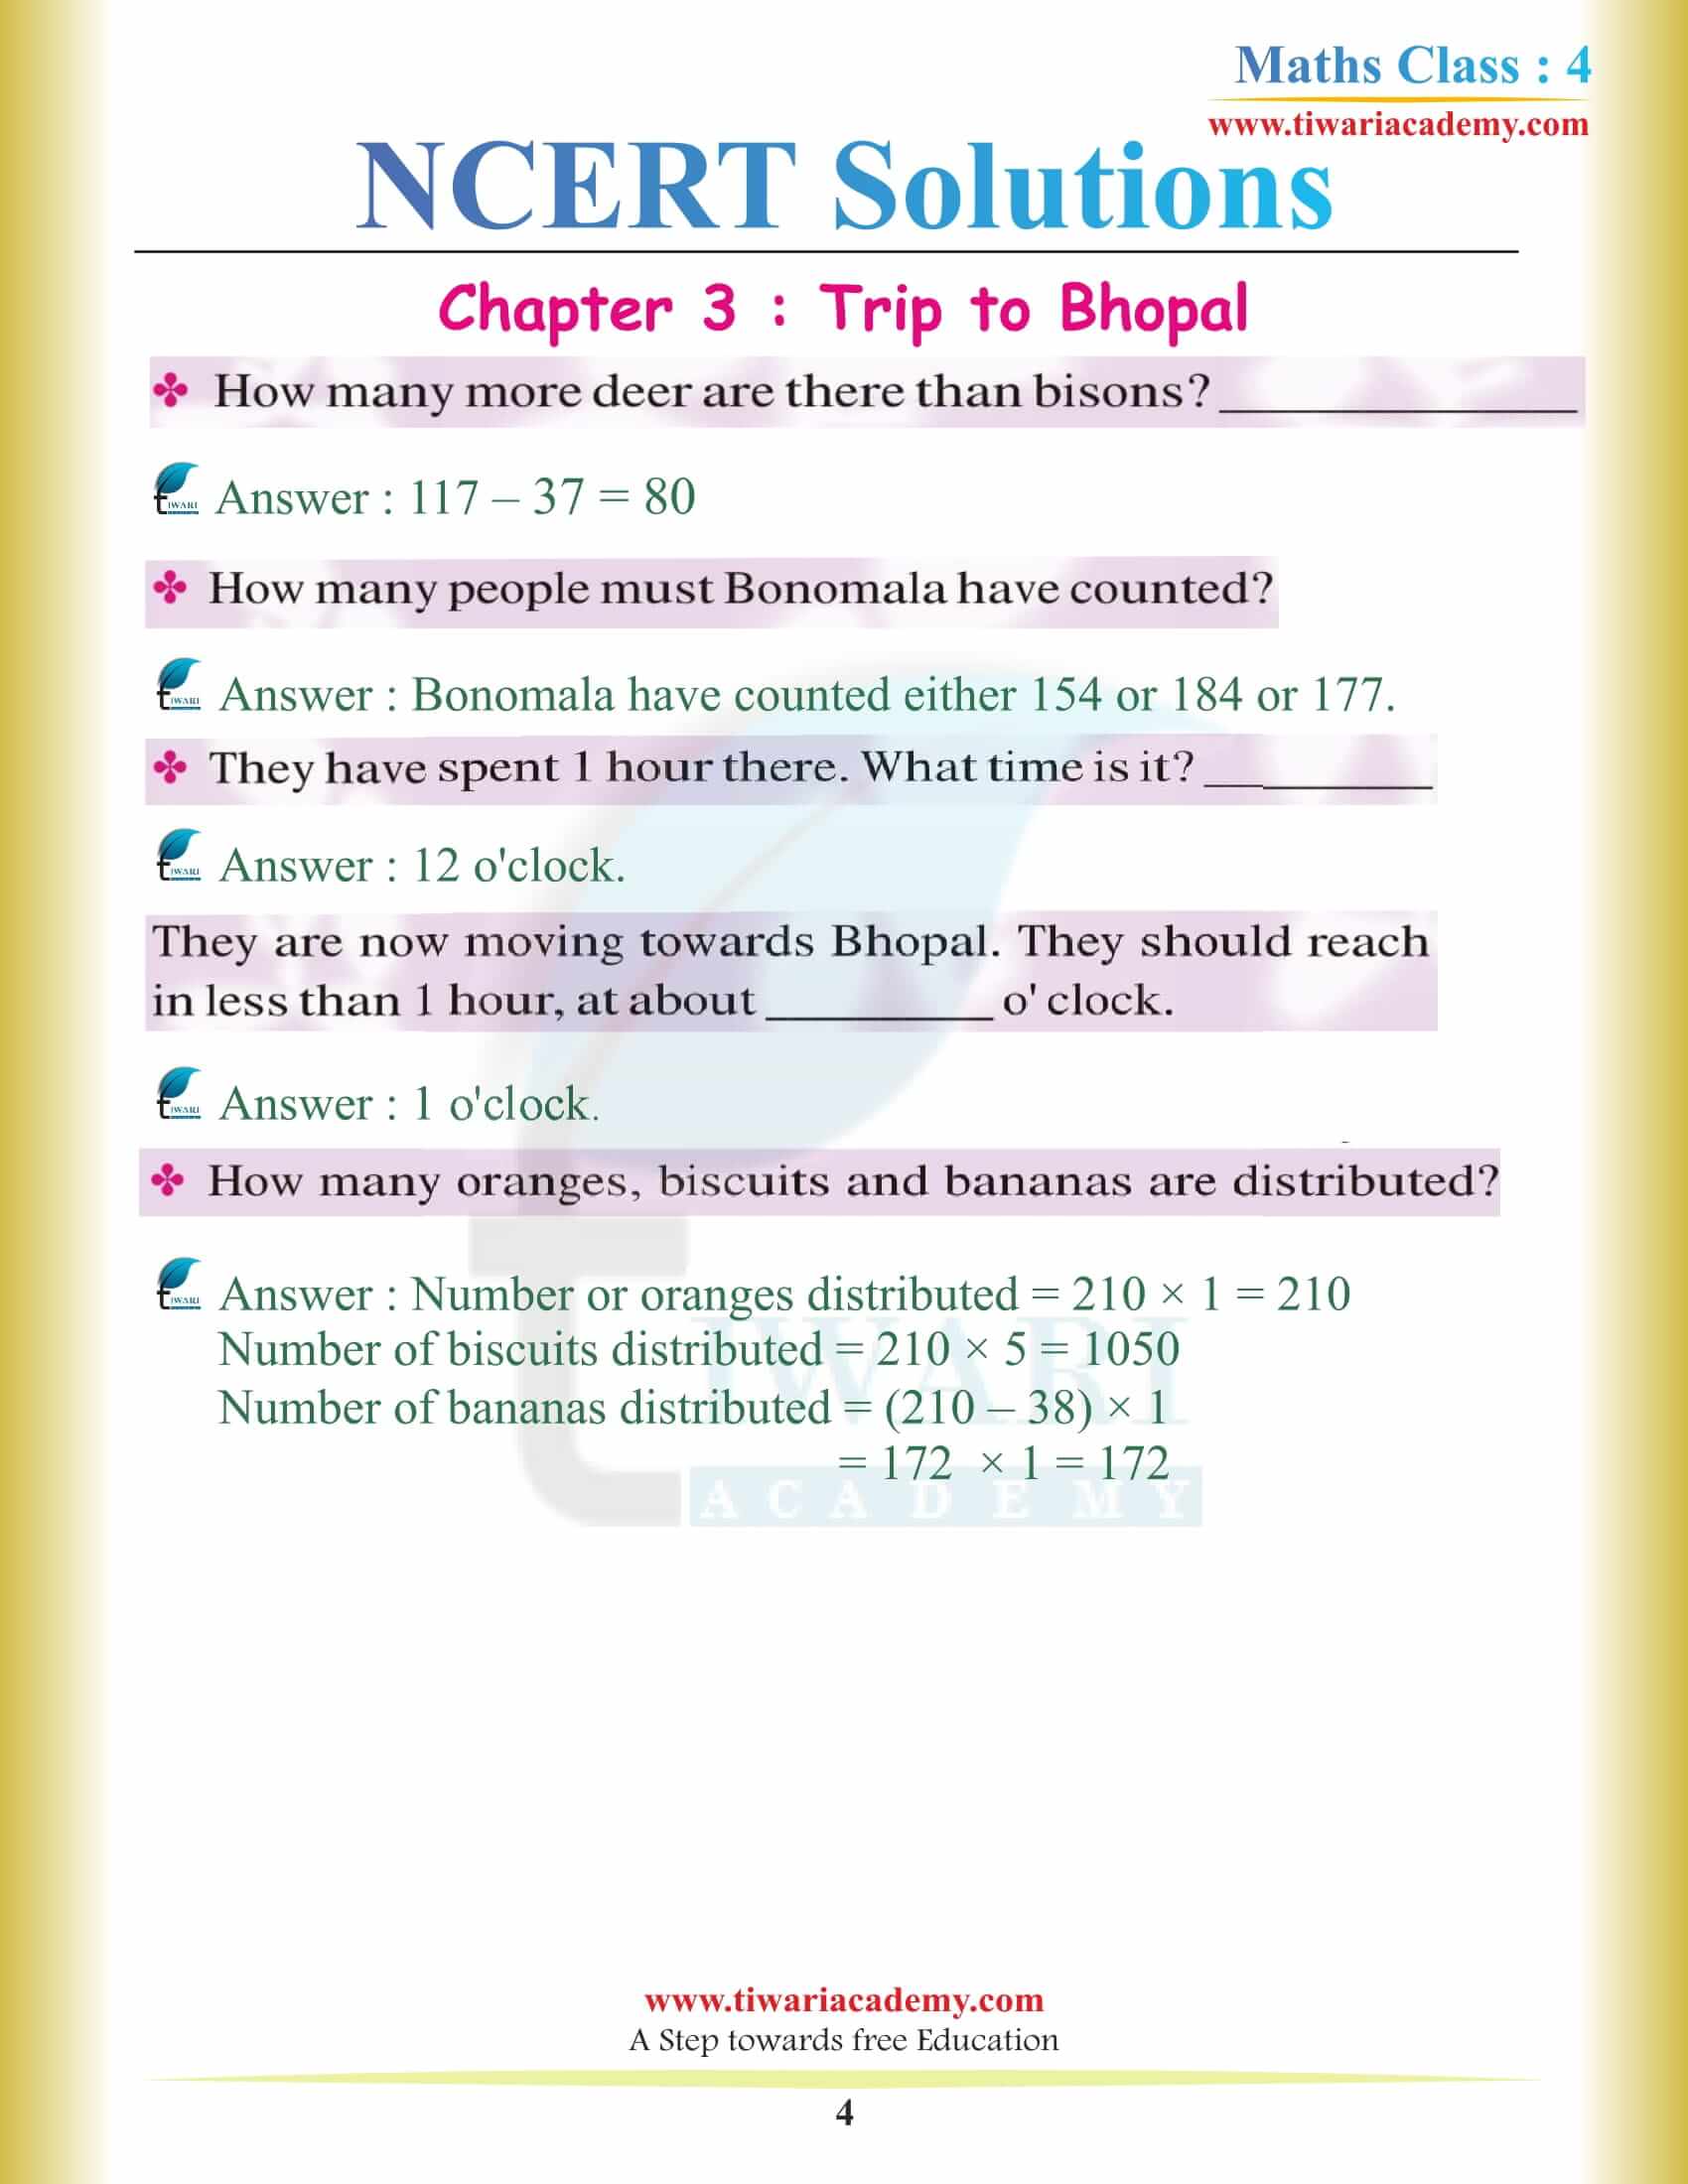 NCERT Solutions for Class 4 Maths Chapter 3 in English Medium